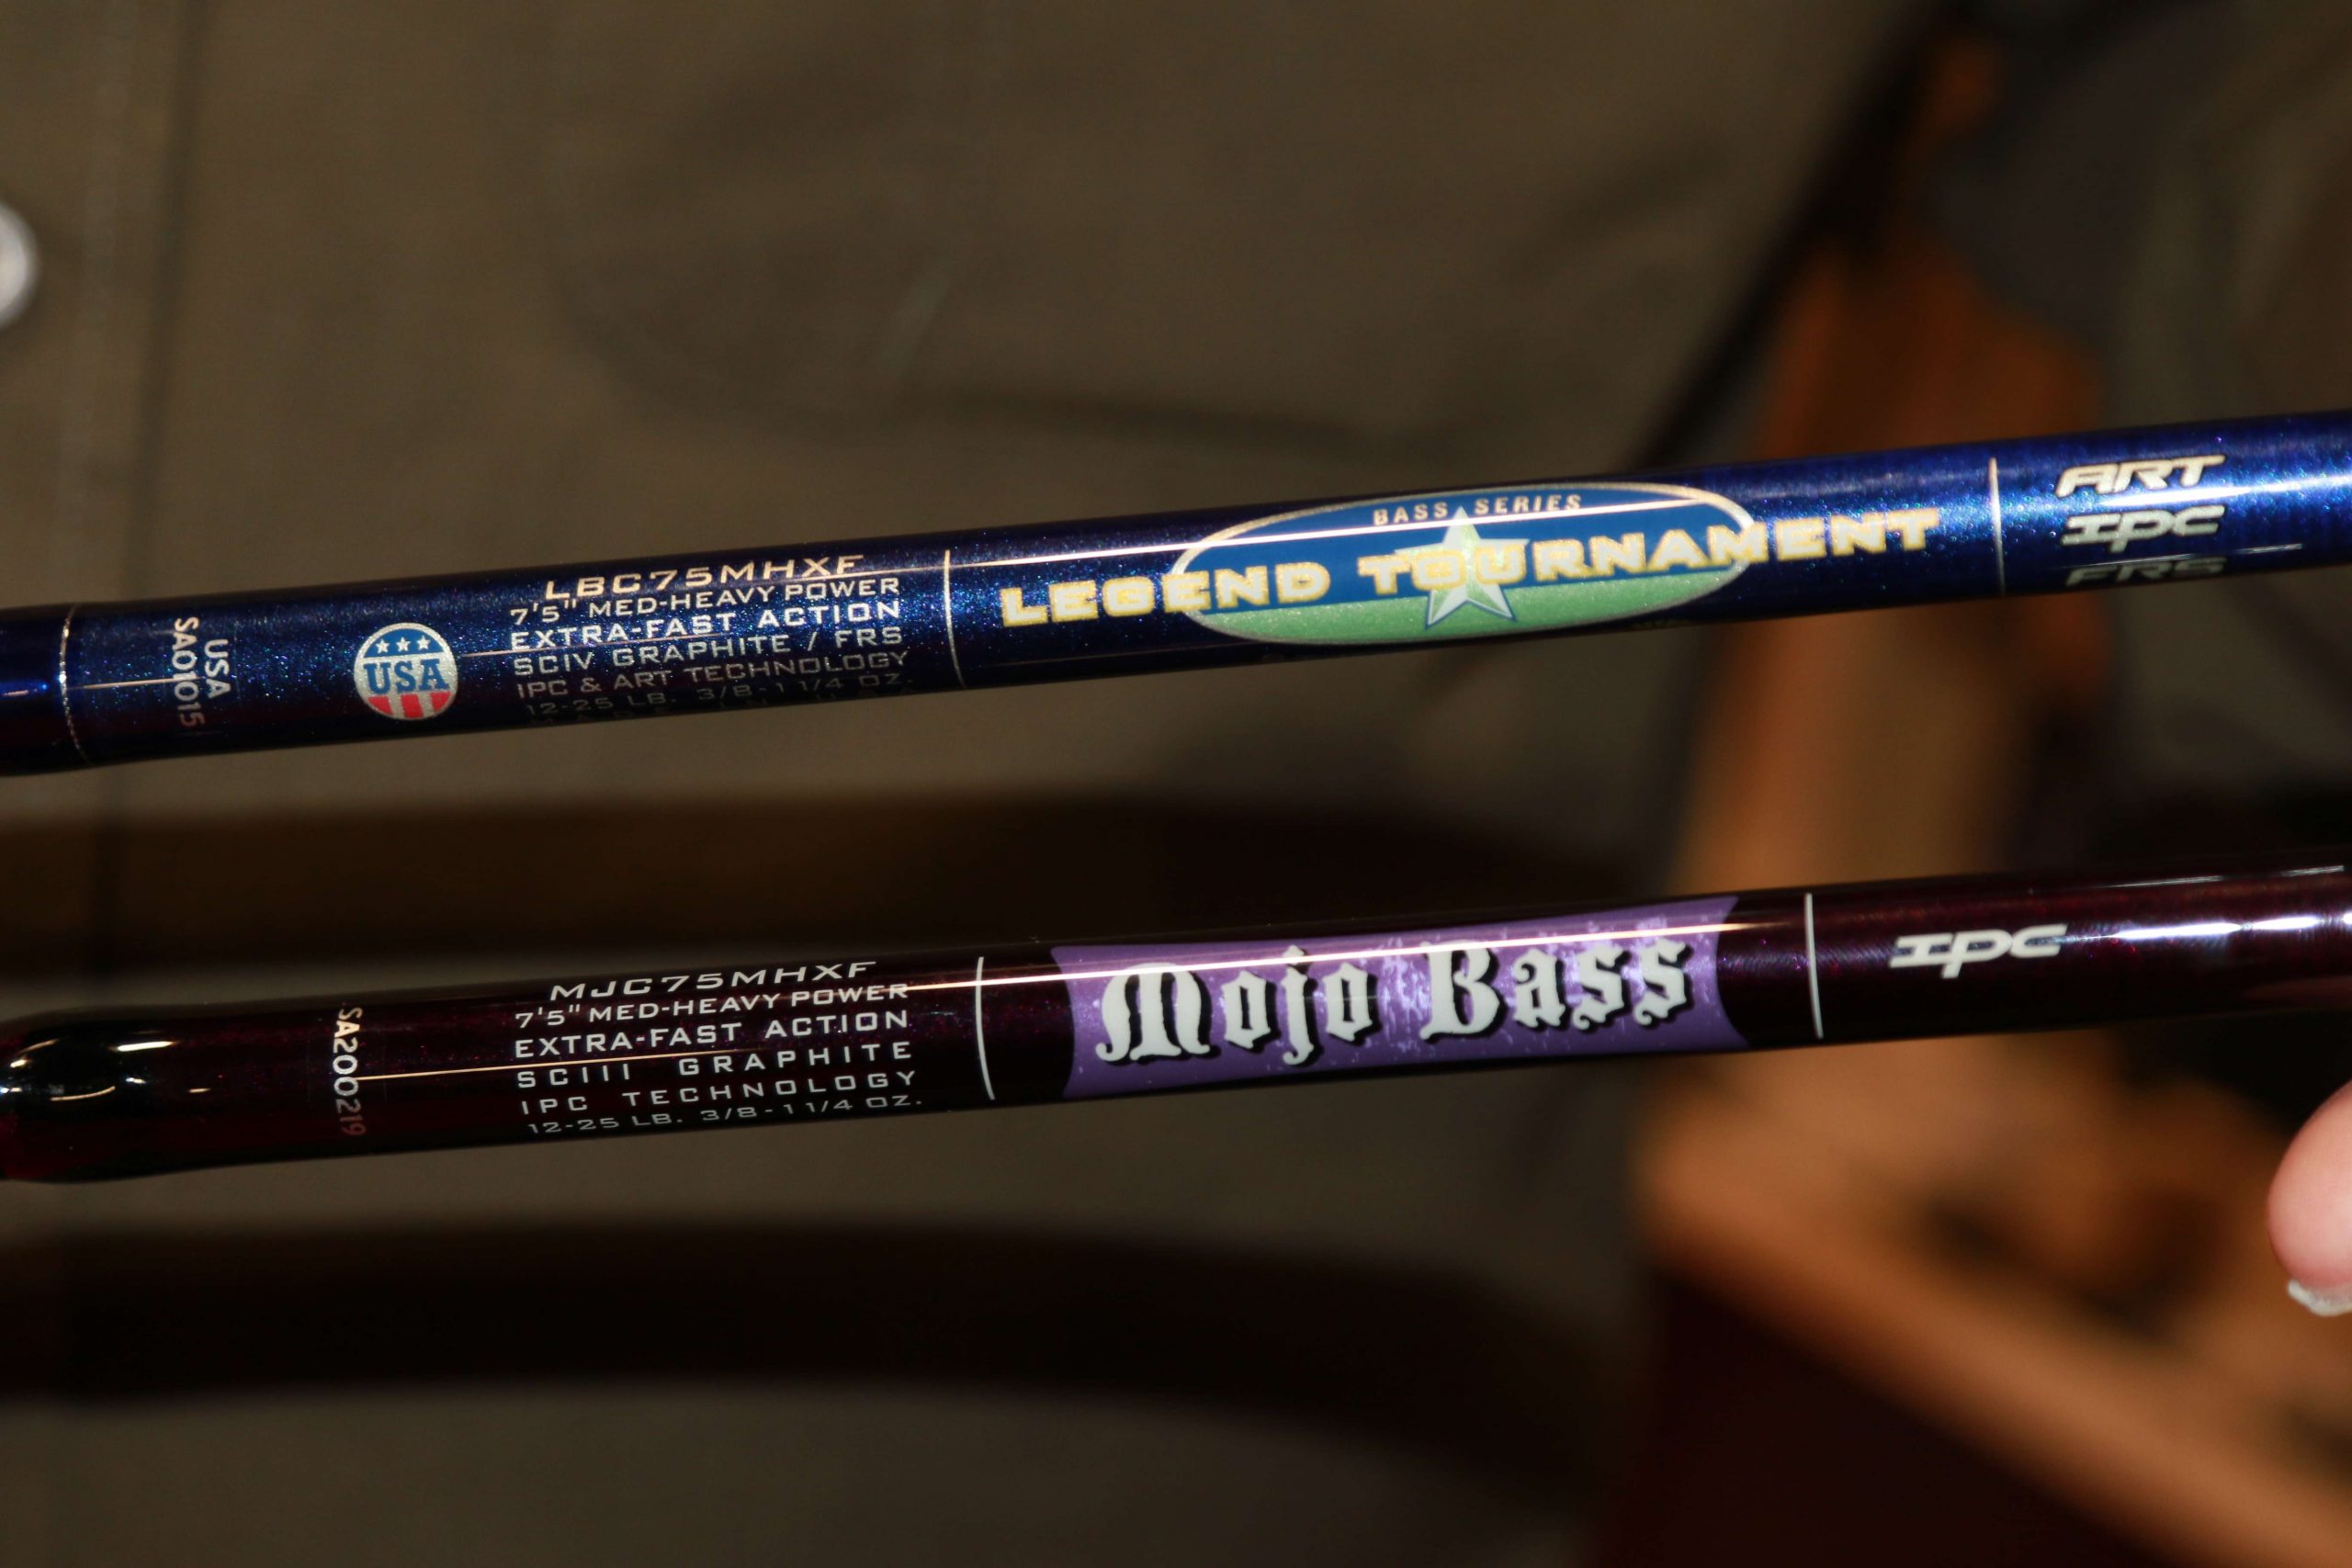 Both of those new St. Croix Swim/Frog rods are 7-5 medium-heavy extra-fast action designs.